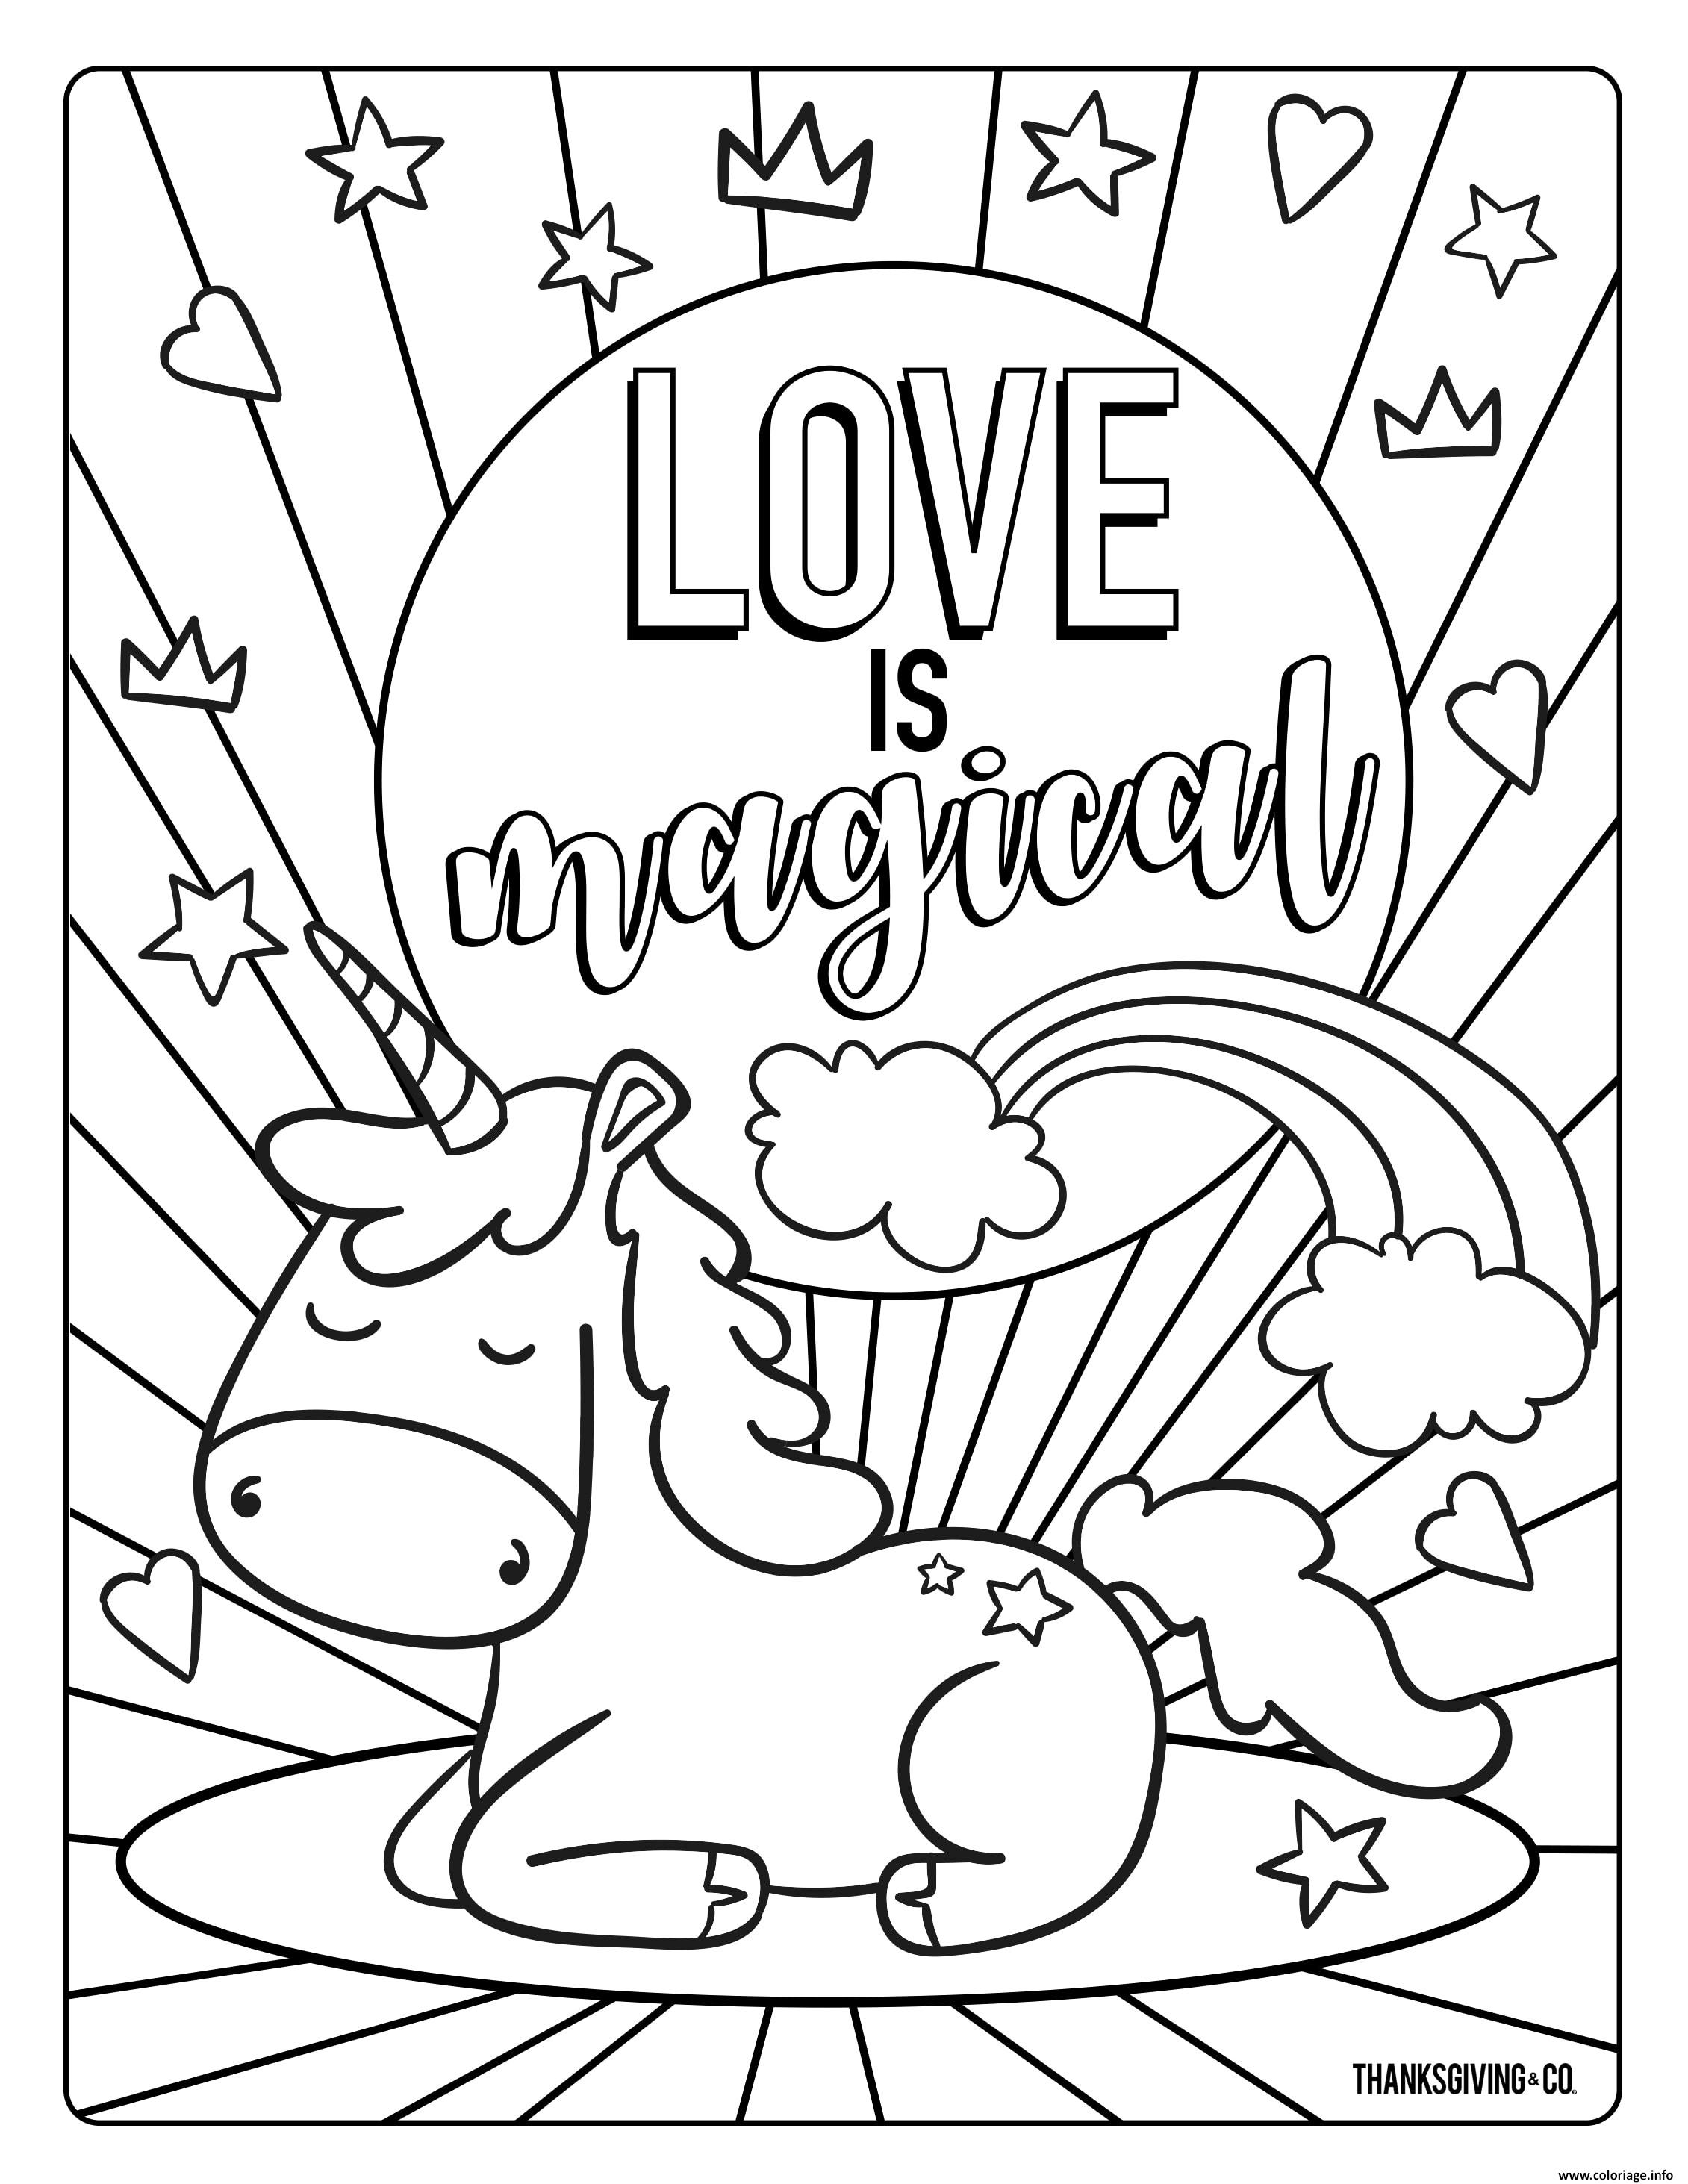 free-online-coloring-pages-with-super-cool-bugs-best-online-gift-store